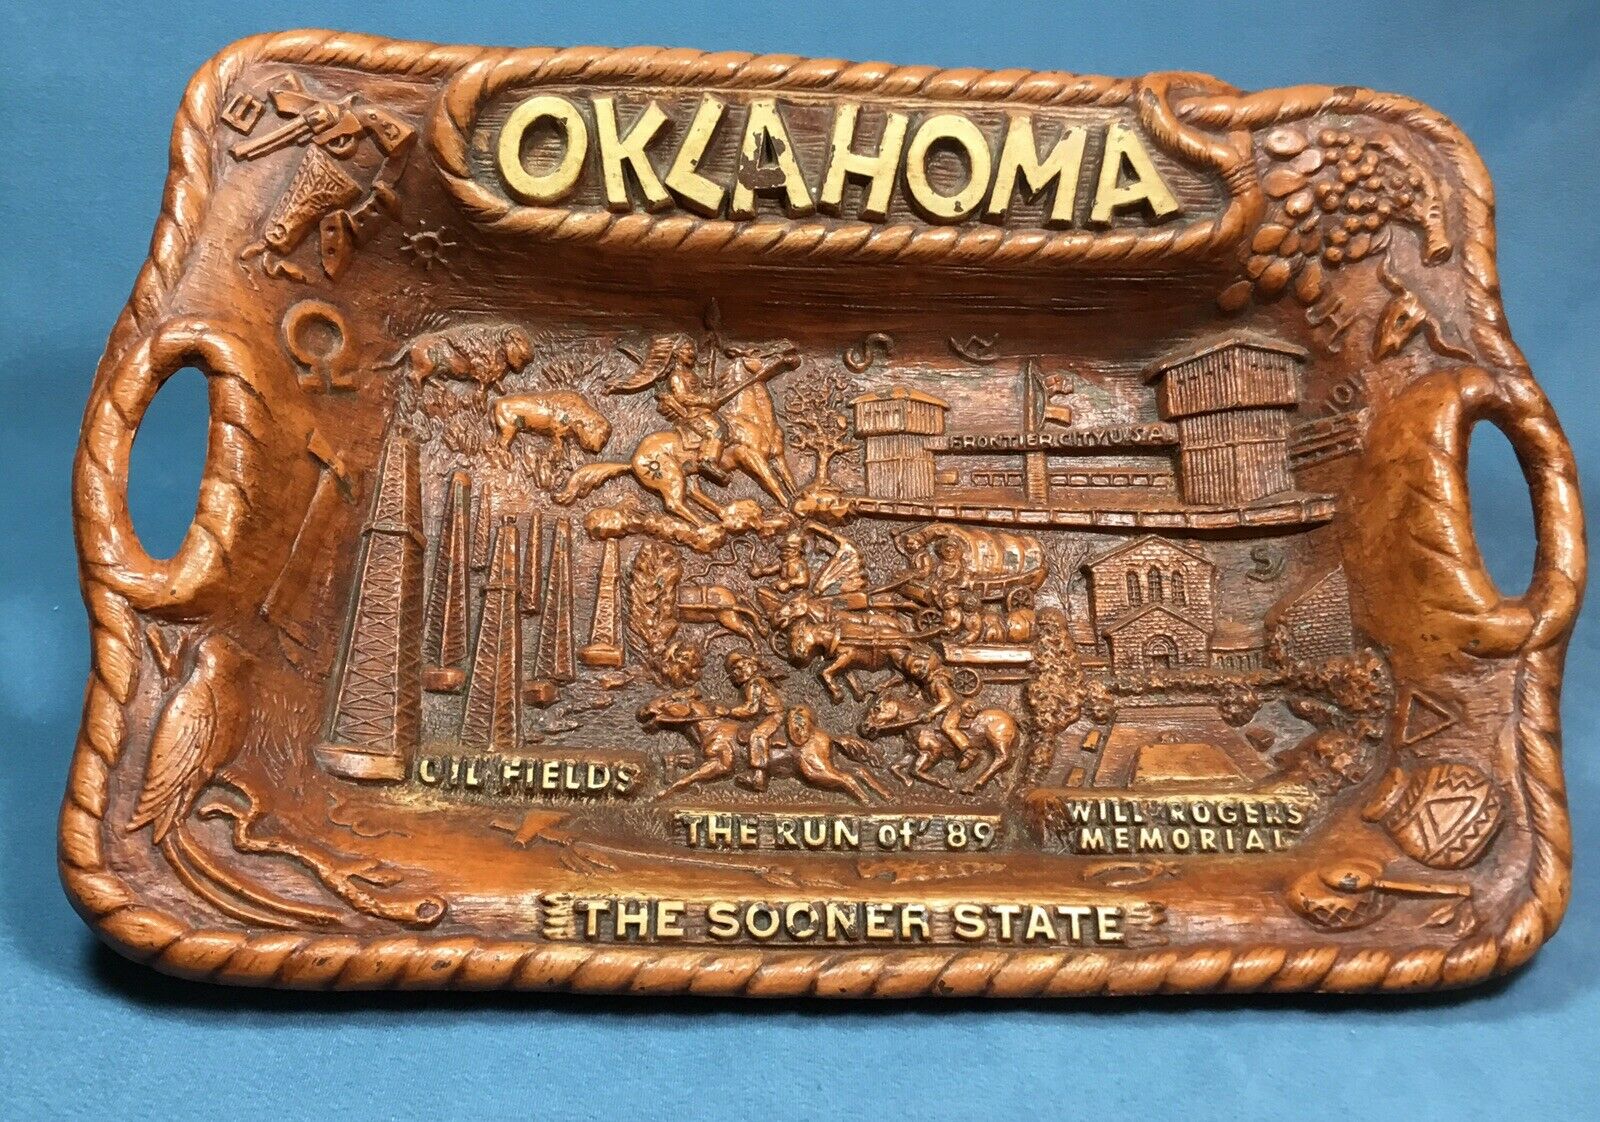 Vintage Oklahoma, The Sooner State, Molded Resin Souvenir Tray From Lugene’s